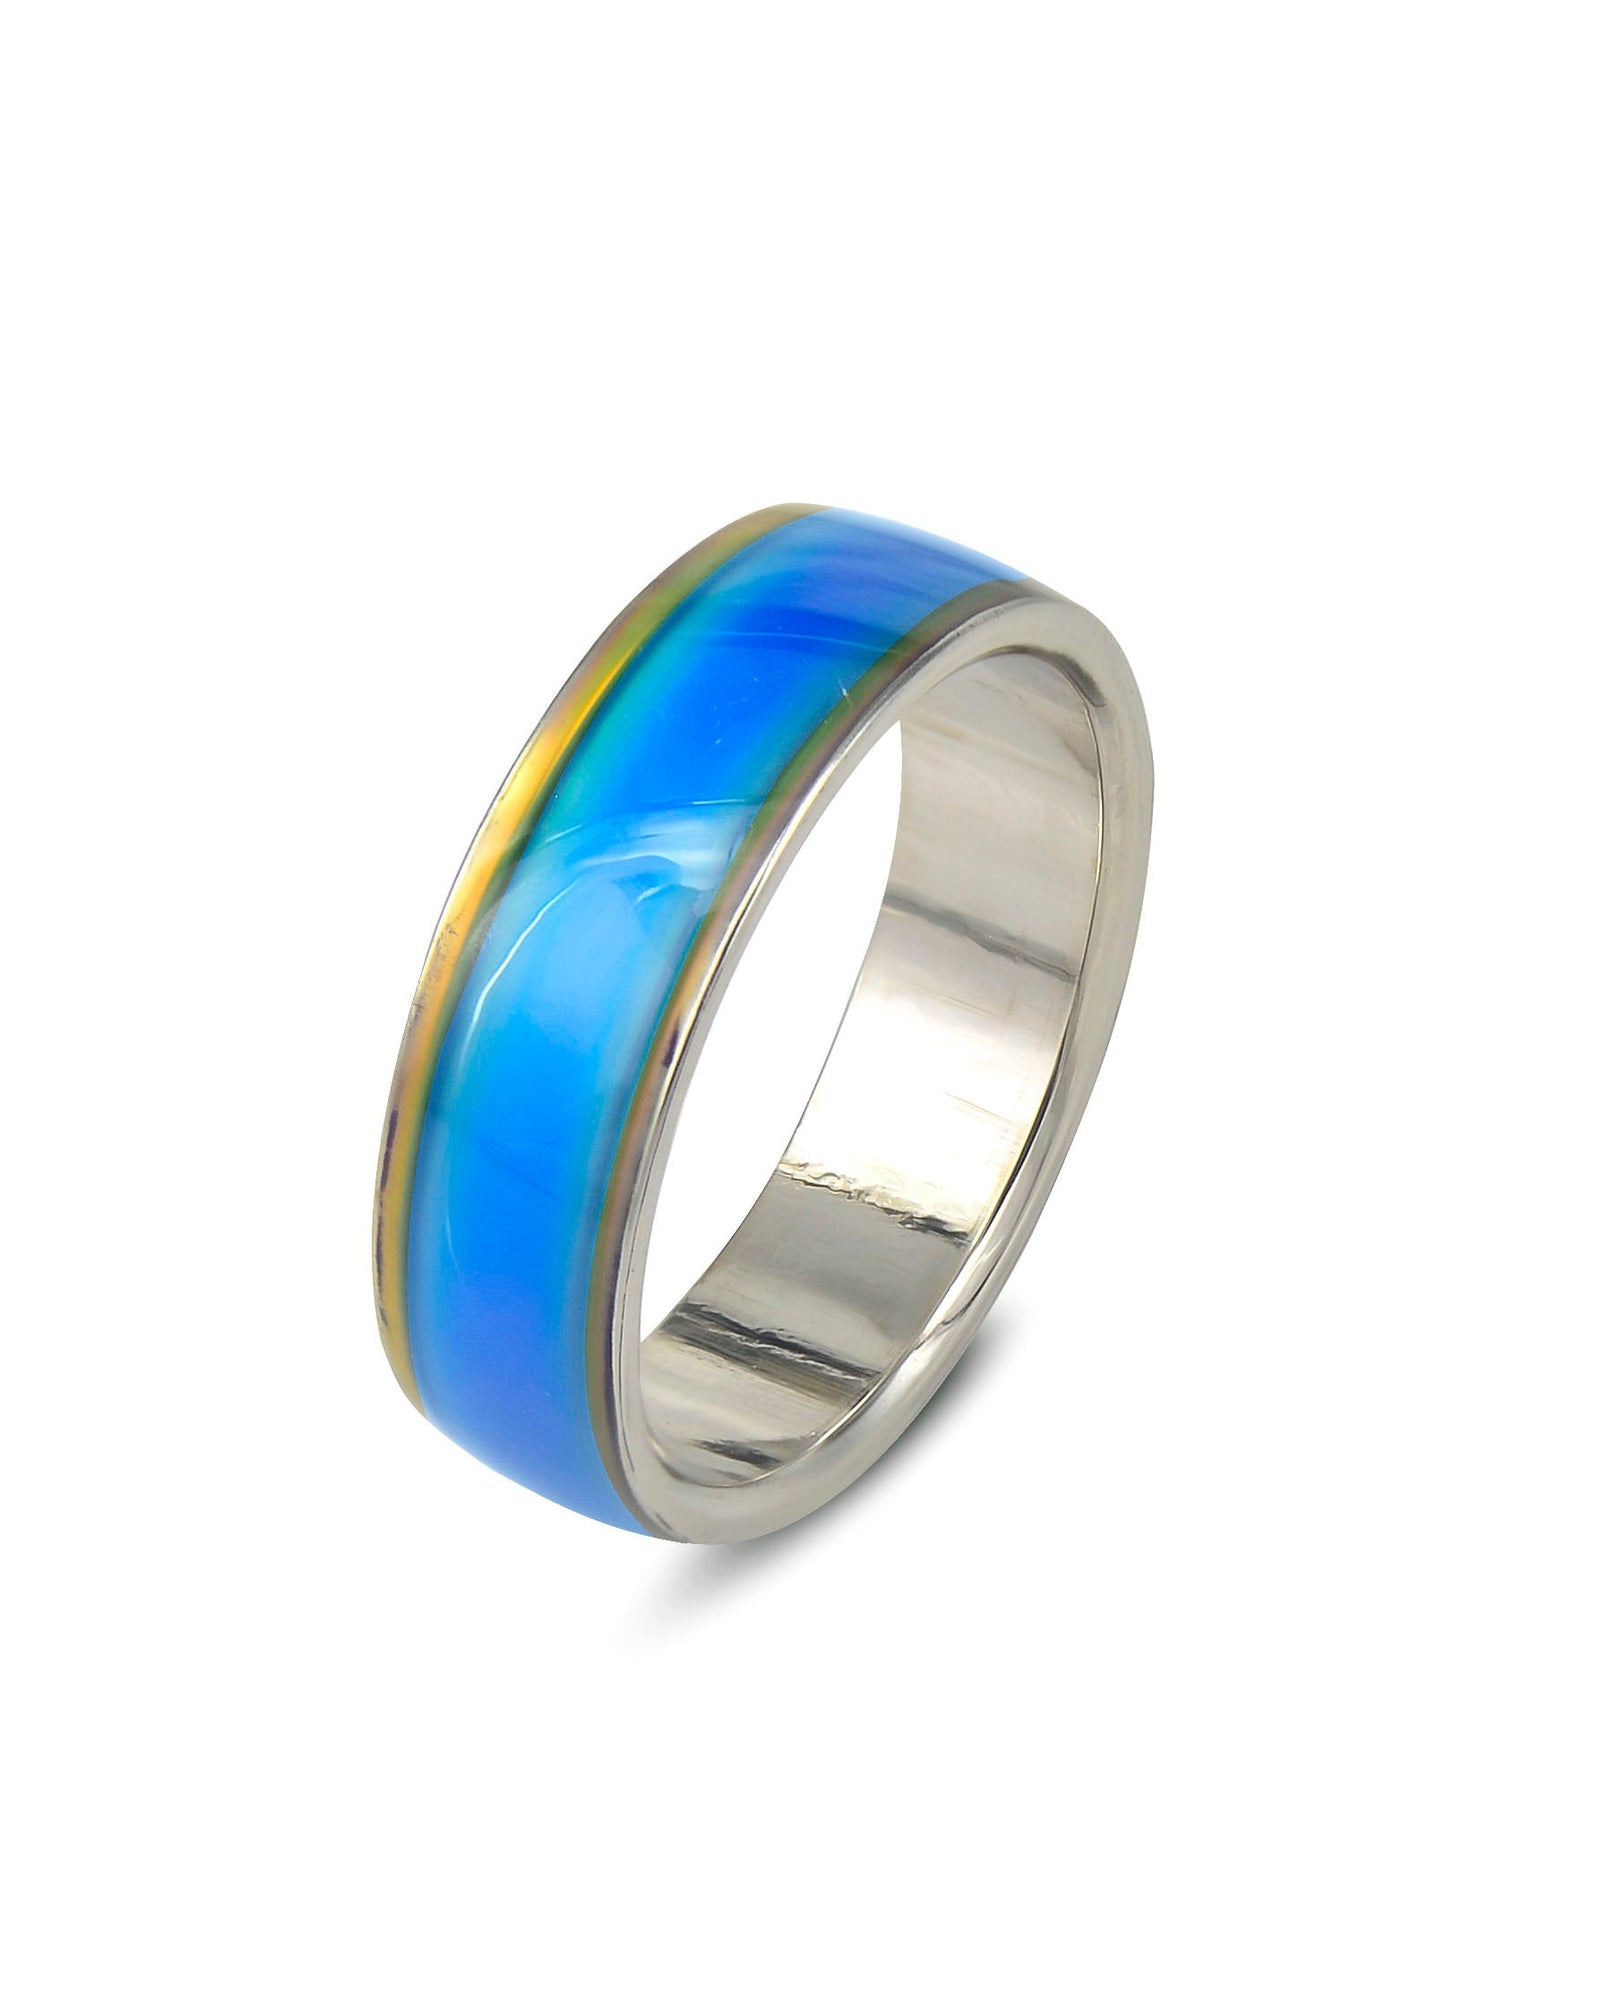 Adult Mood Ring, Stainless Steel Ring, Color Changing Mood Ring